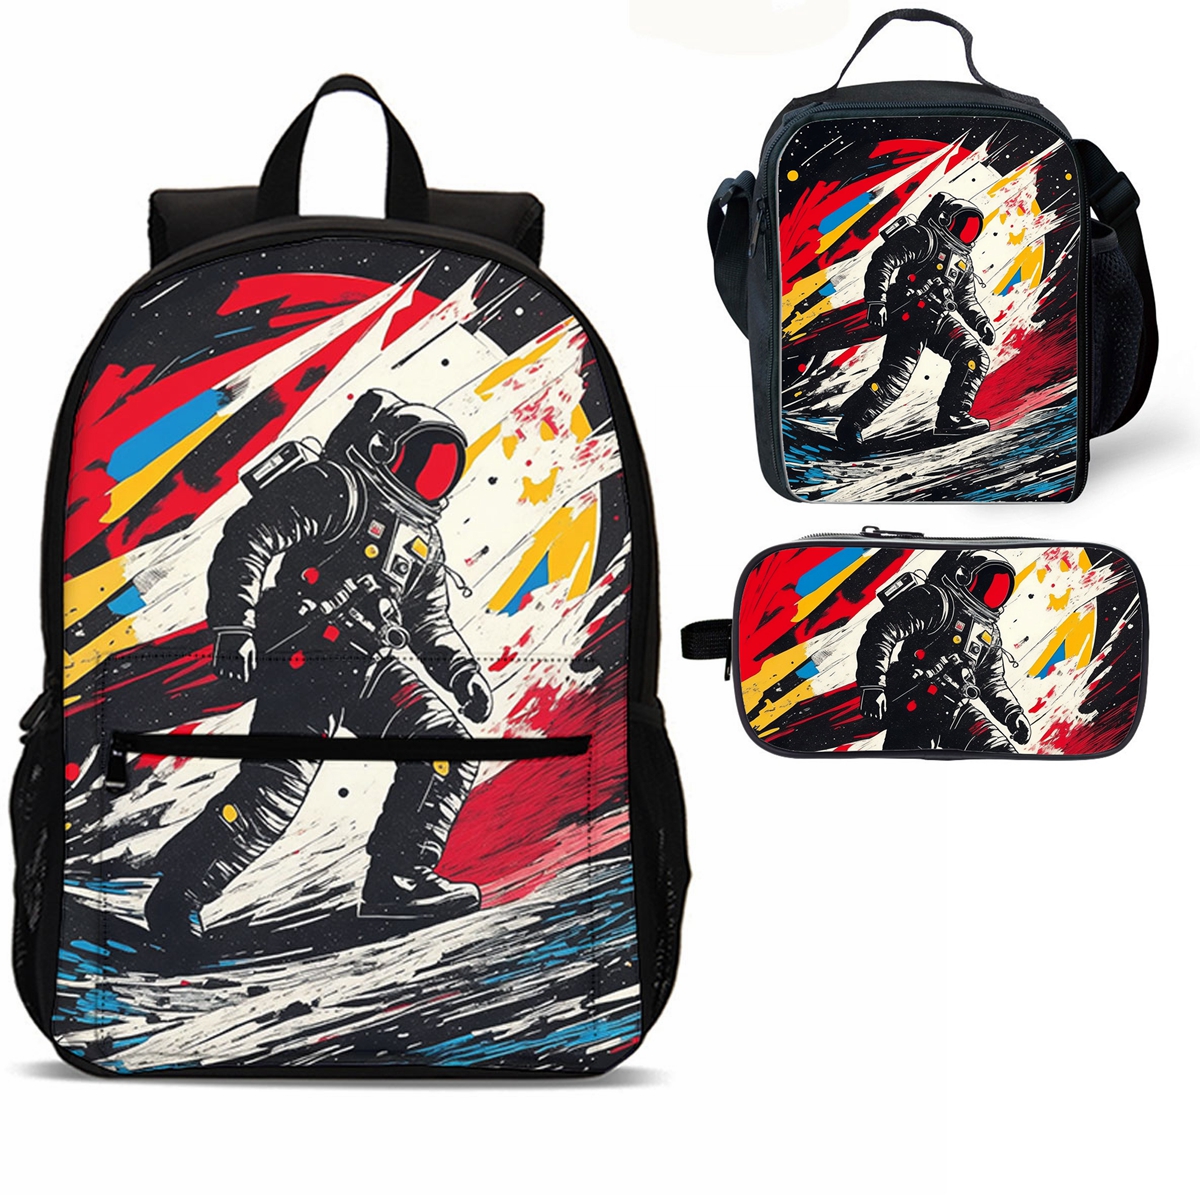 Astronaut 3 Pieces Combo 18 inches School Backpack Lunch Bag Pencil Case